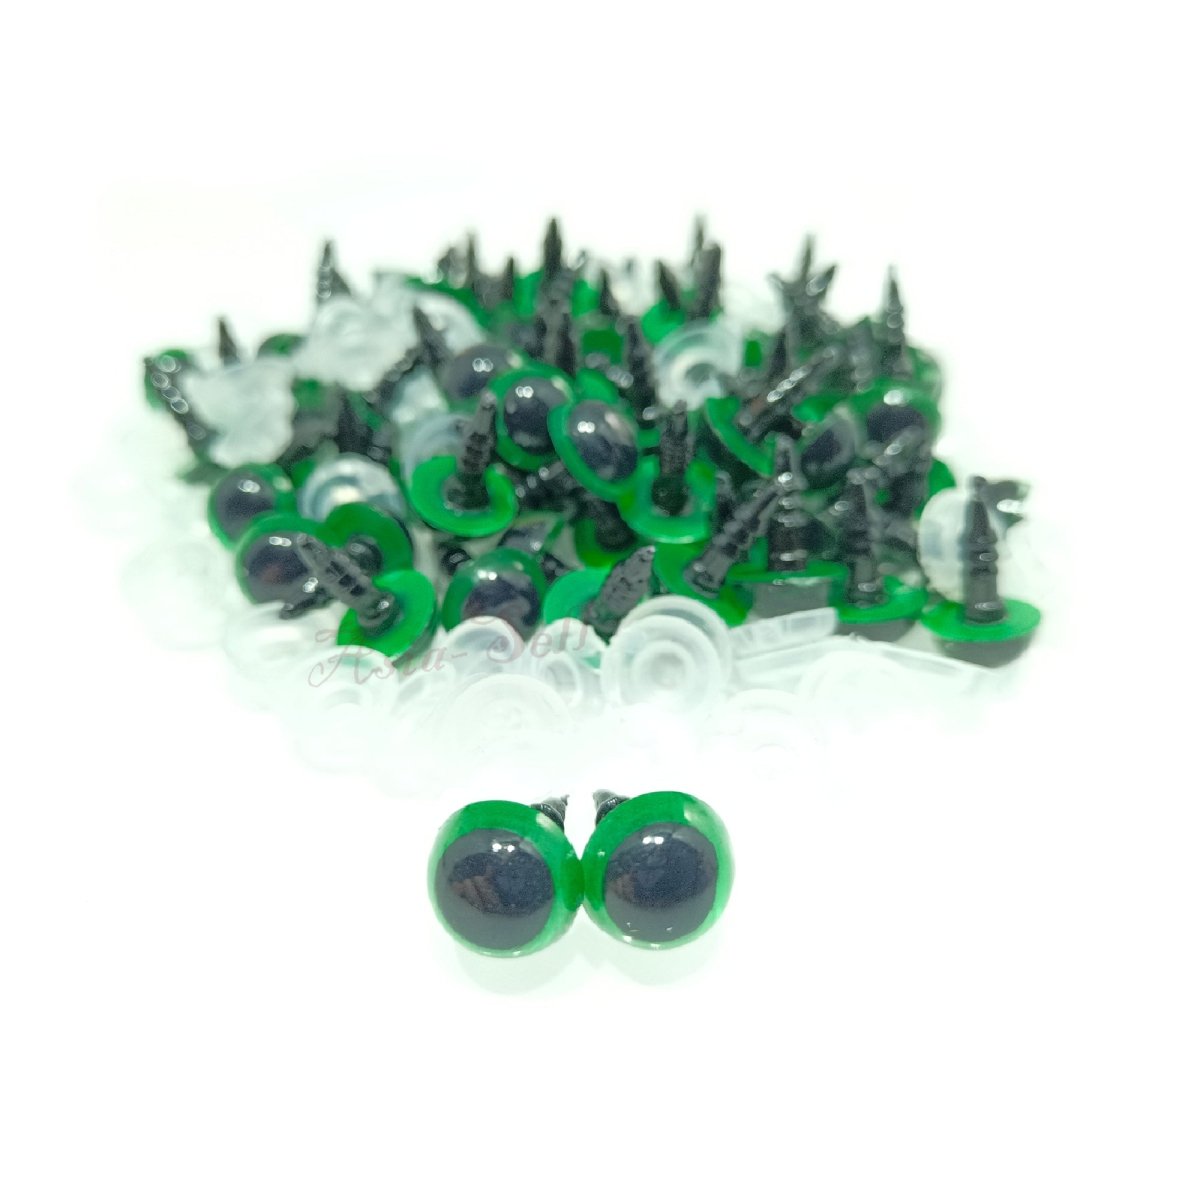 20pcs 8mm Colour Safety Eyes For Teddy Bear Doll Animal Puppet Crafts Plastic Eyes - Green - - Asia Sell